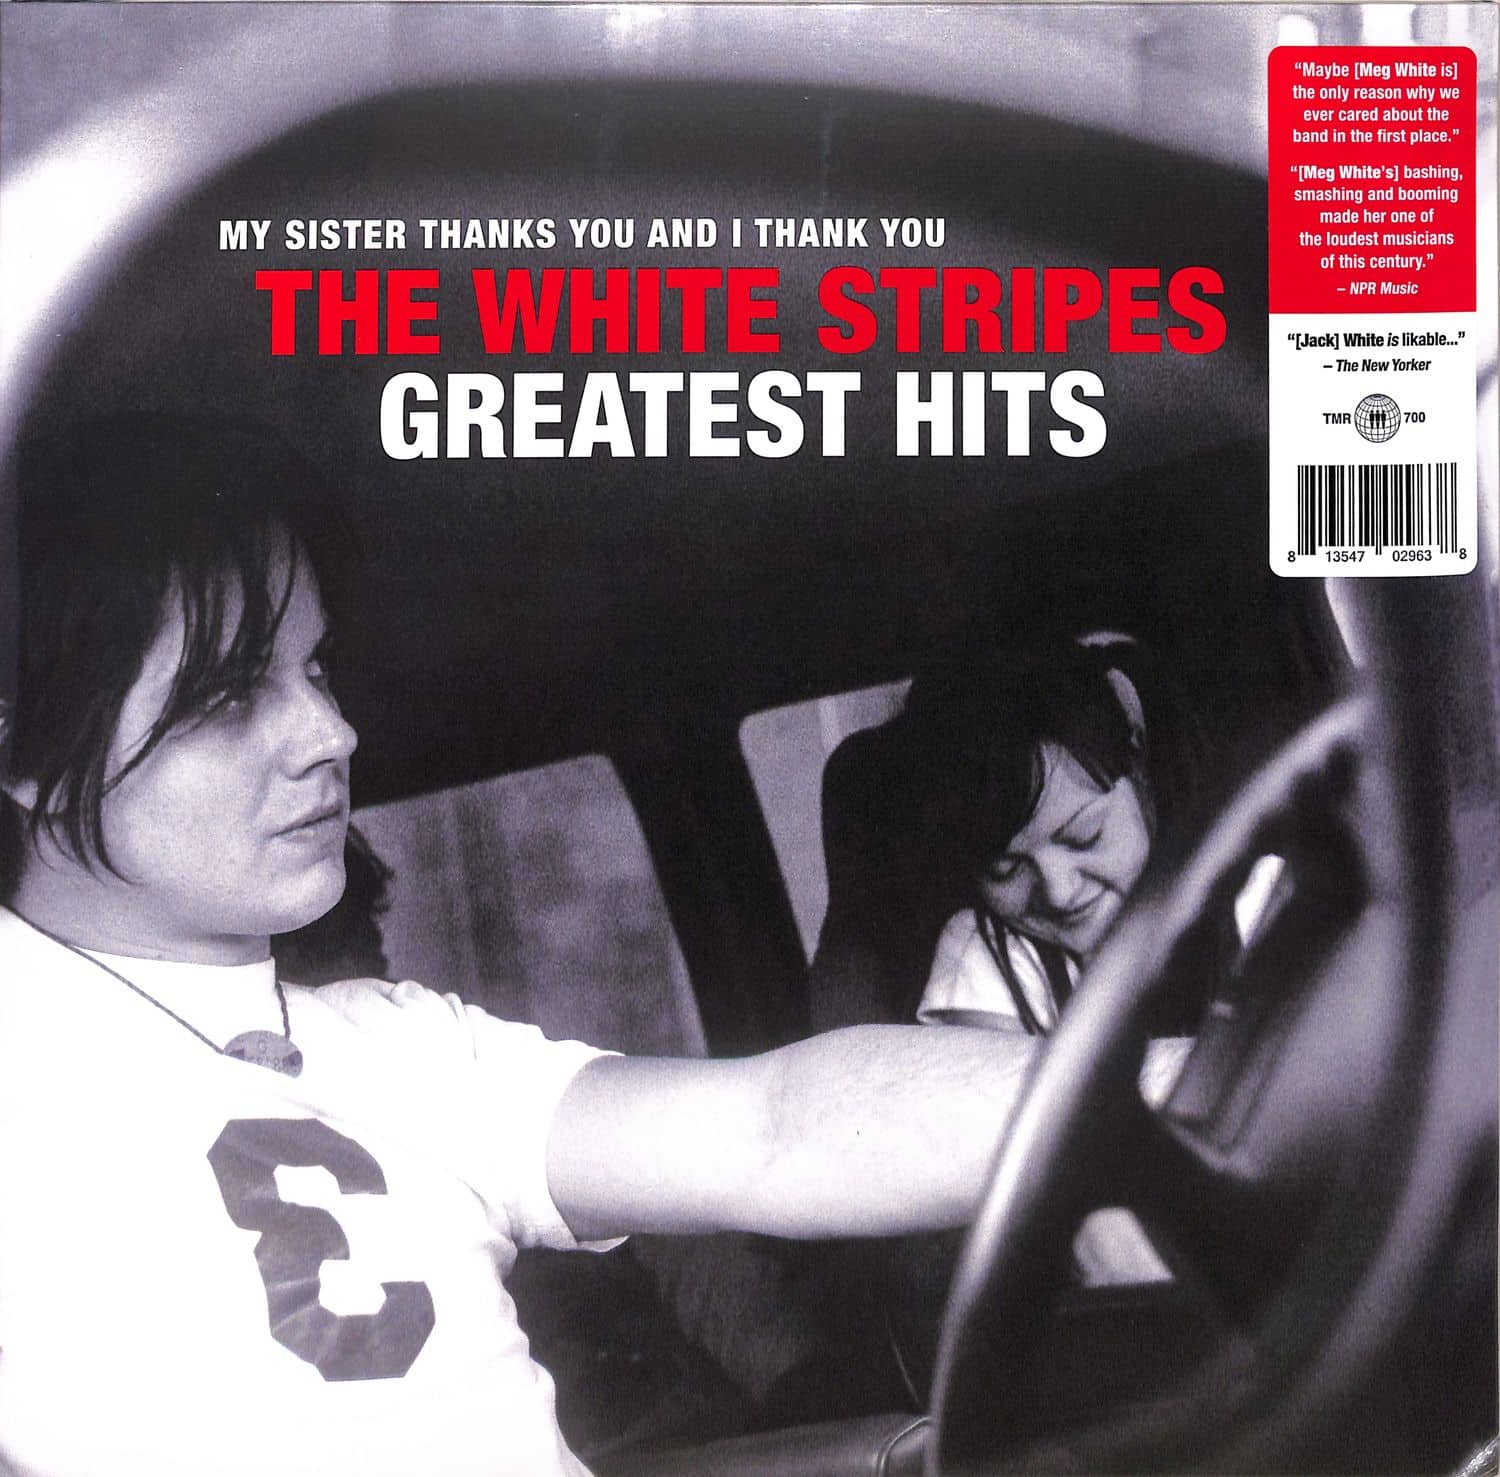 The White Stripes - GREATEST HITS 